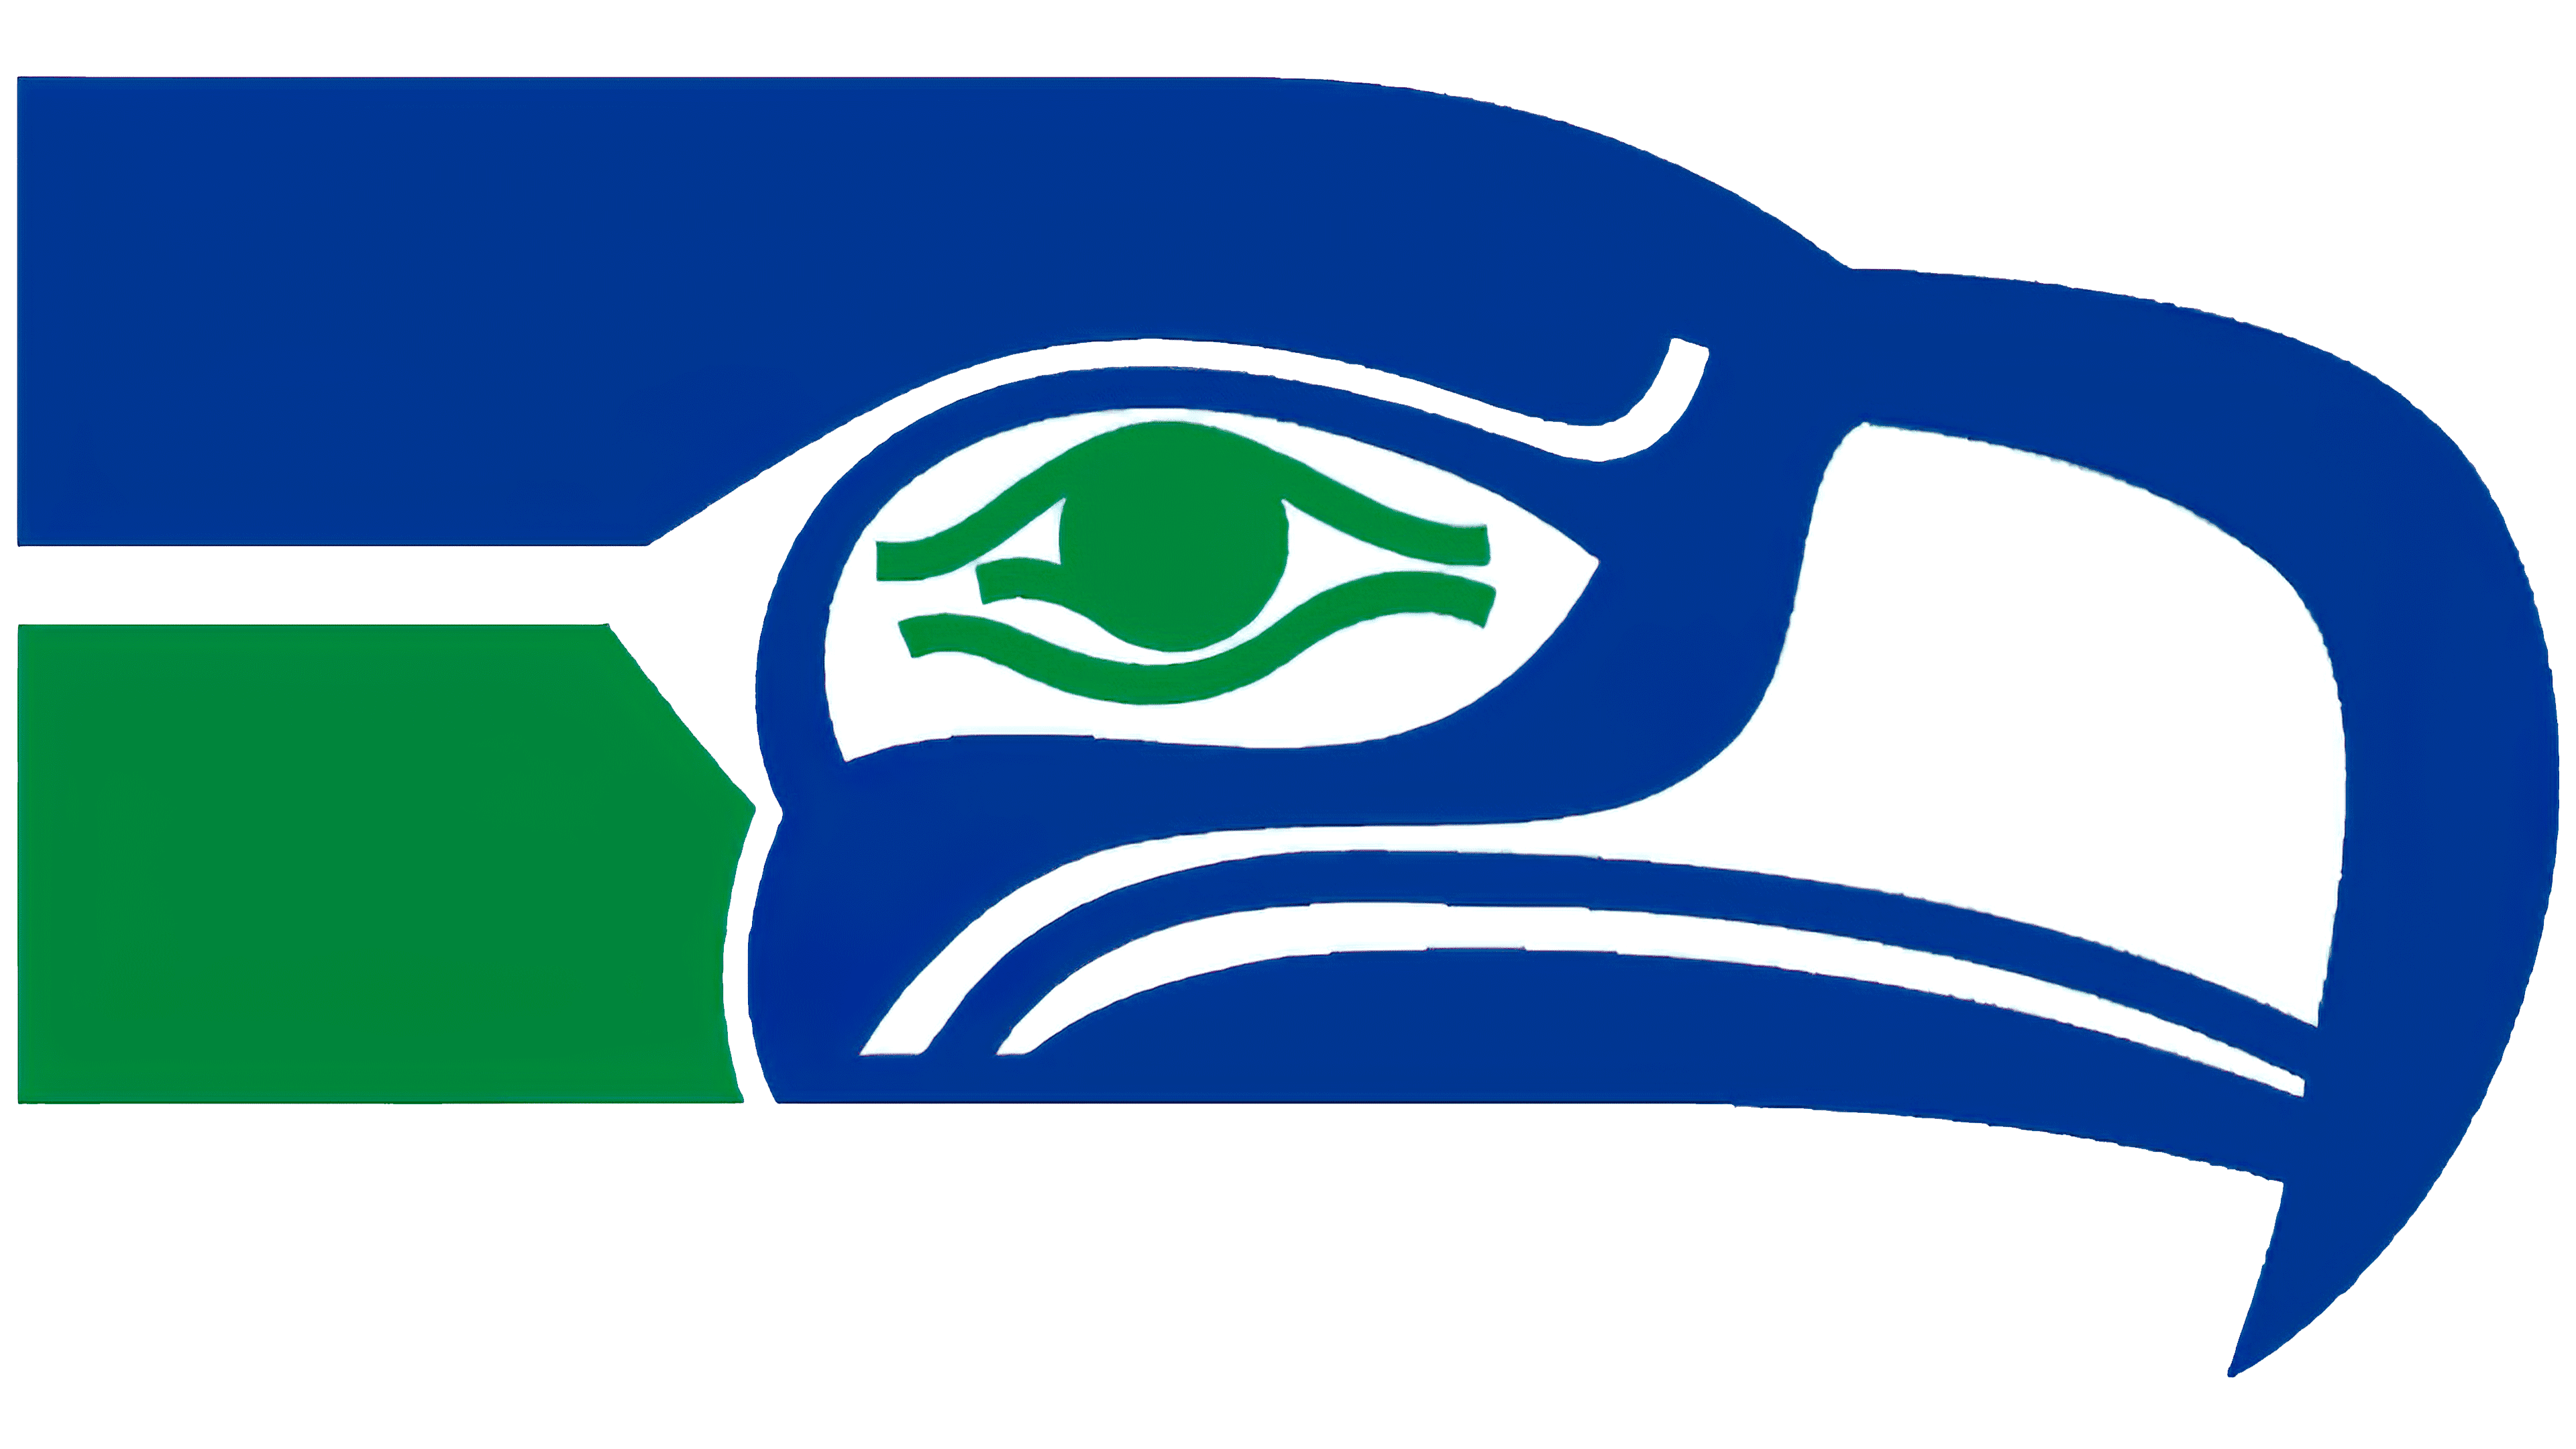 Seattle Seahawks Logo, PNG, Symbol, History, Meaning